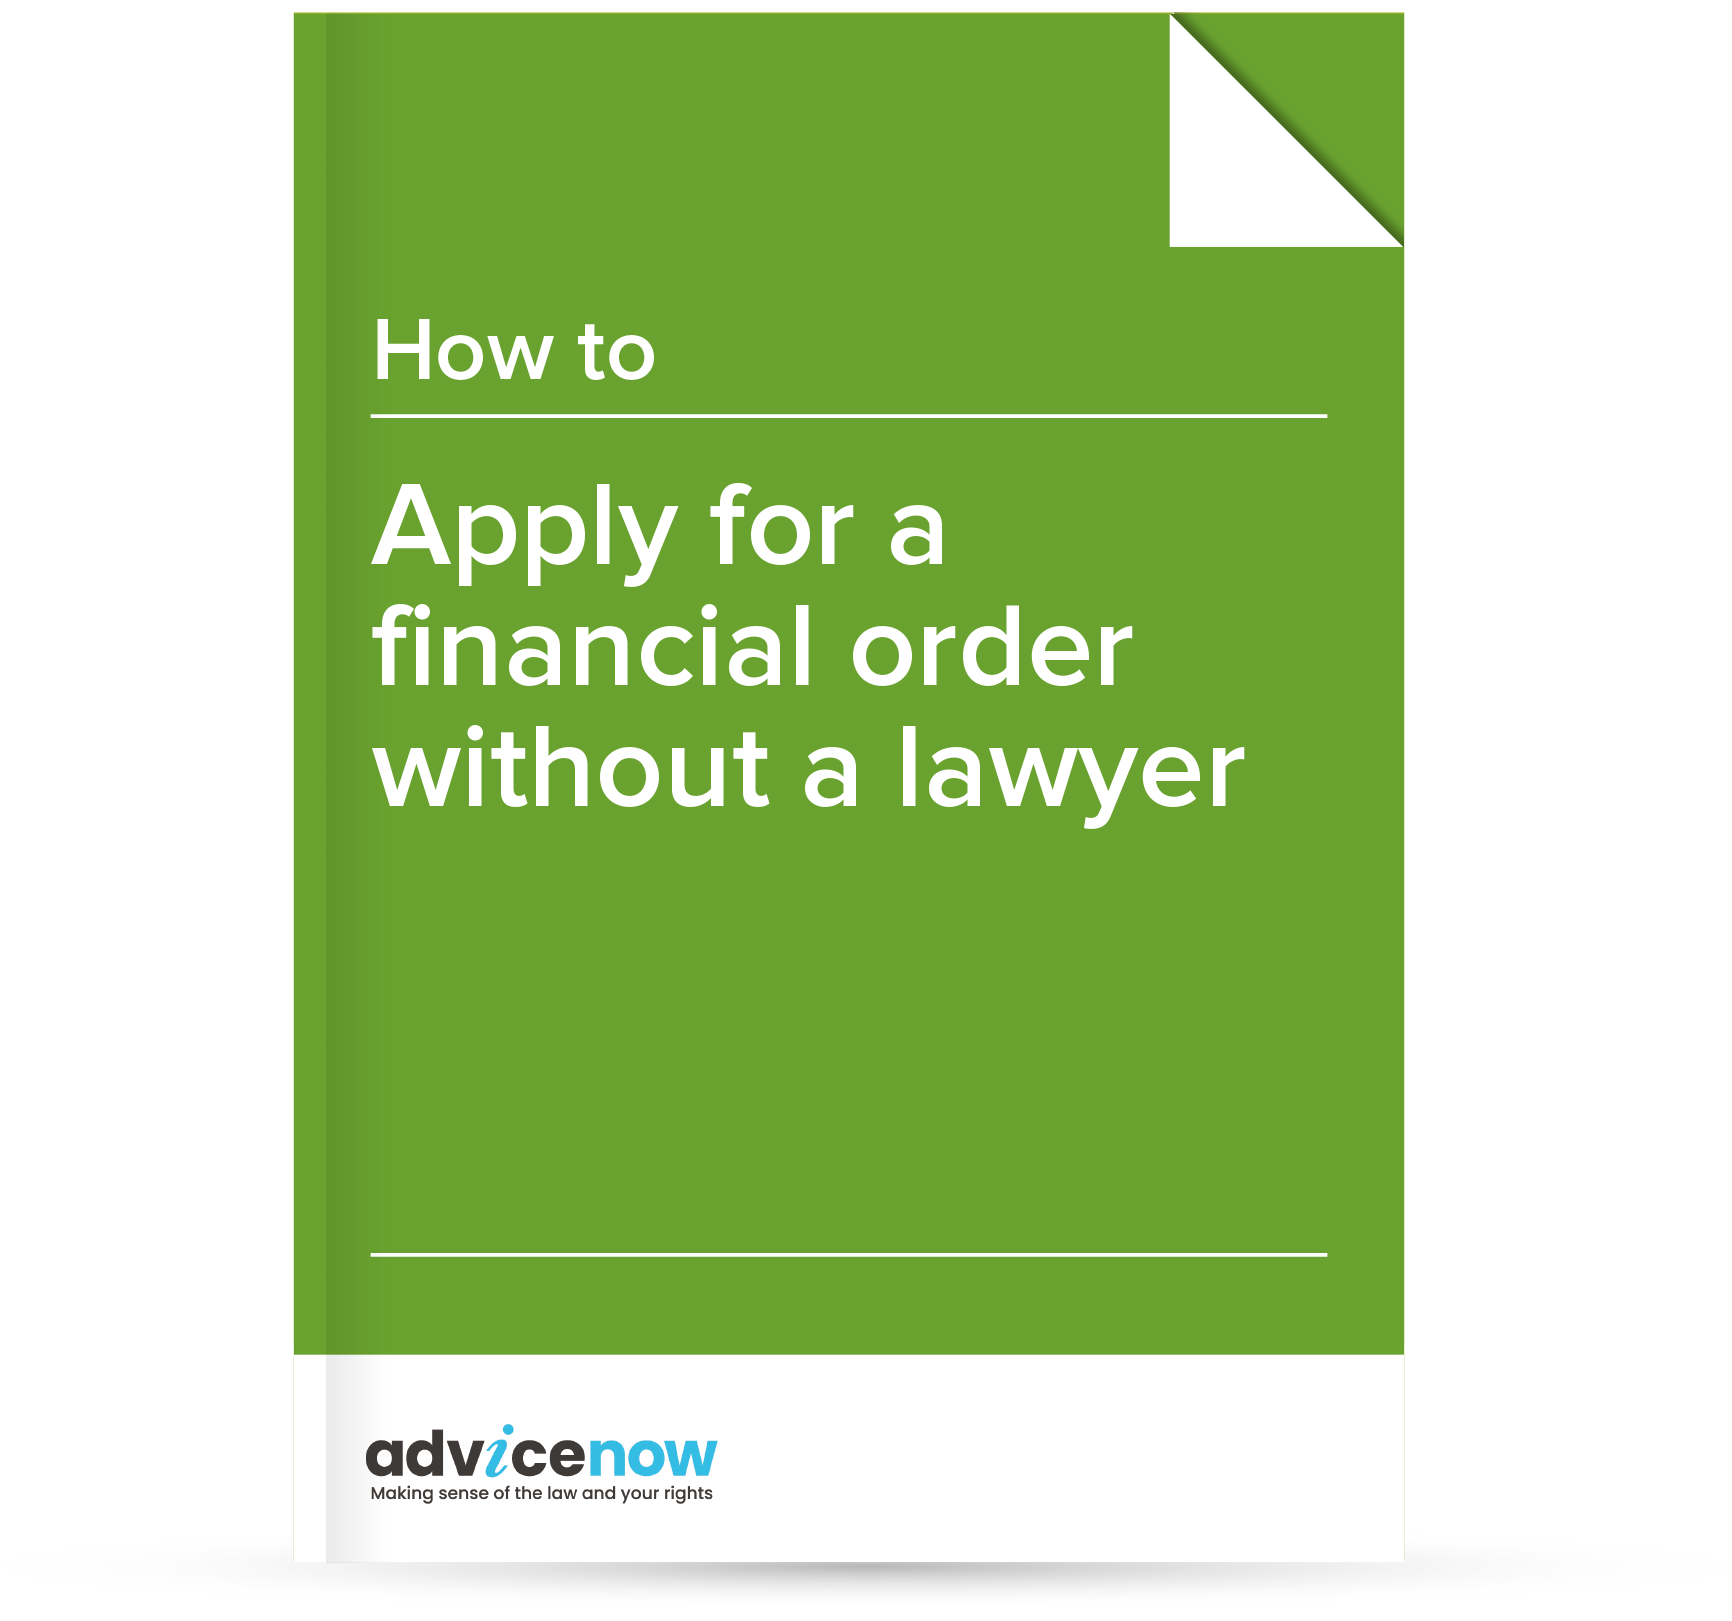 Applying for a financial order